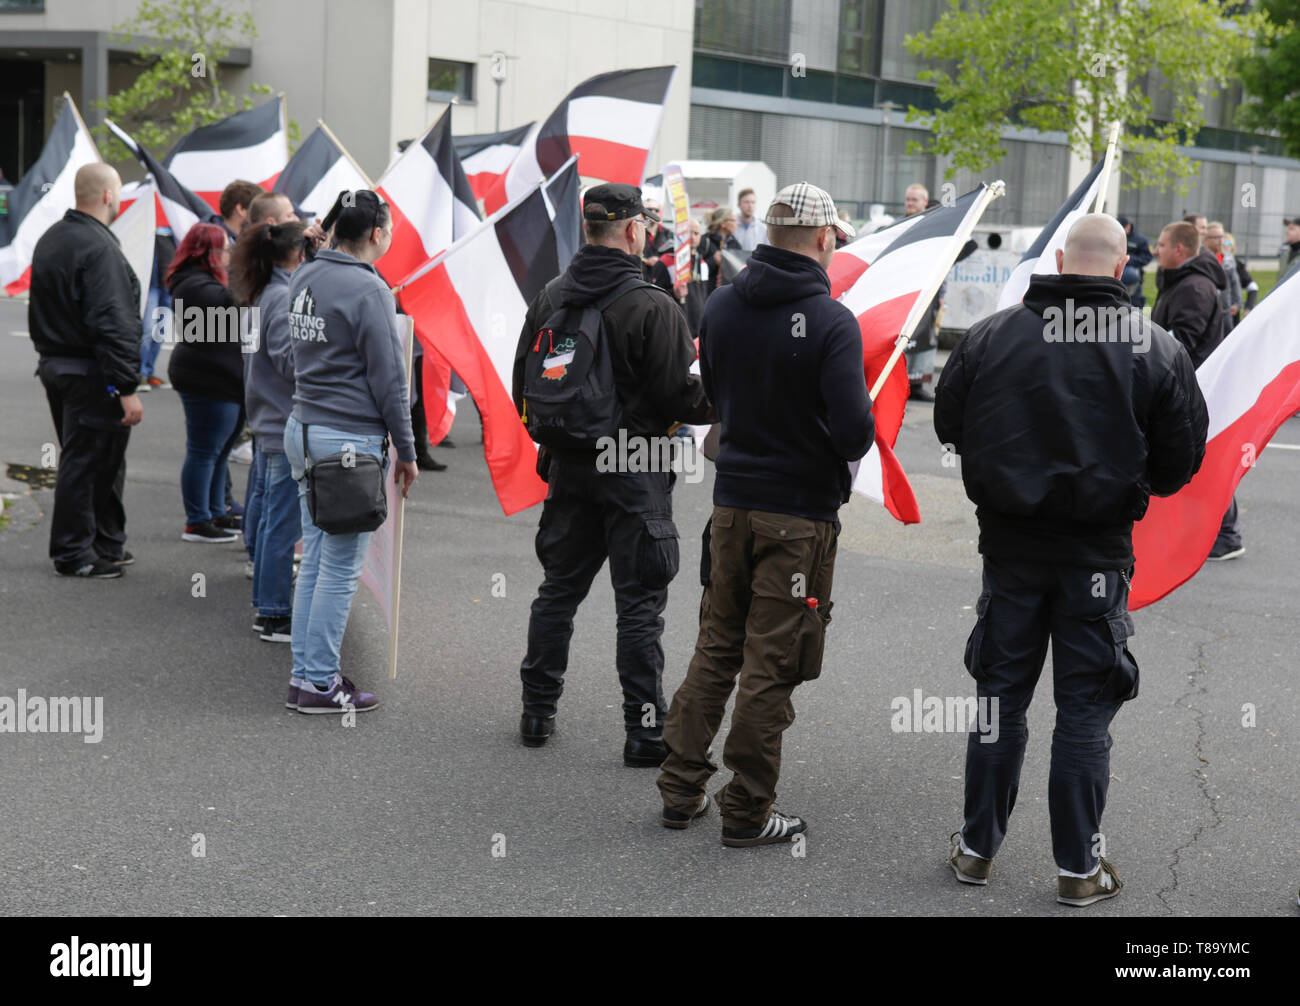 Pforzheim, Germany. 11th May 2019. The right-wing protesters hold flags of the German Empire during a rally. Around 80 people participated in a march through Pforzheim, organised by the right-wing party ‘Die Rechte’ (The Right). The main issues of the march was the promotion of voting for Die Rechte’ in the upcoming European Election and their anti-immigration policies. They were confronted by several hundred counter-protesters from different political organisations. Stock Photo